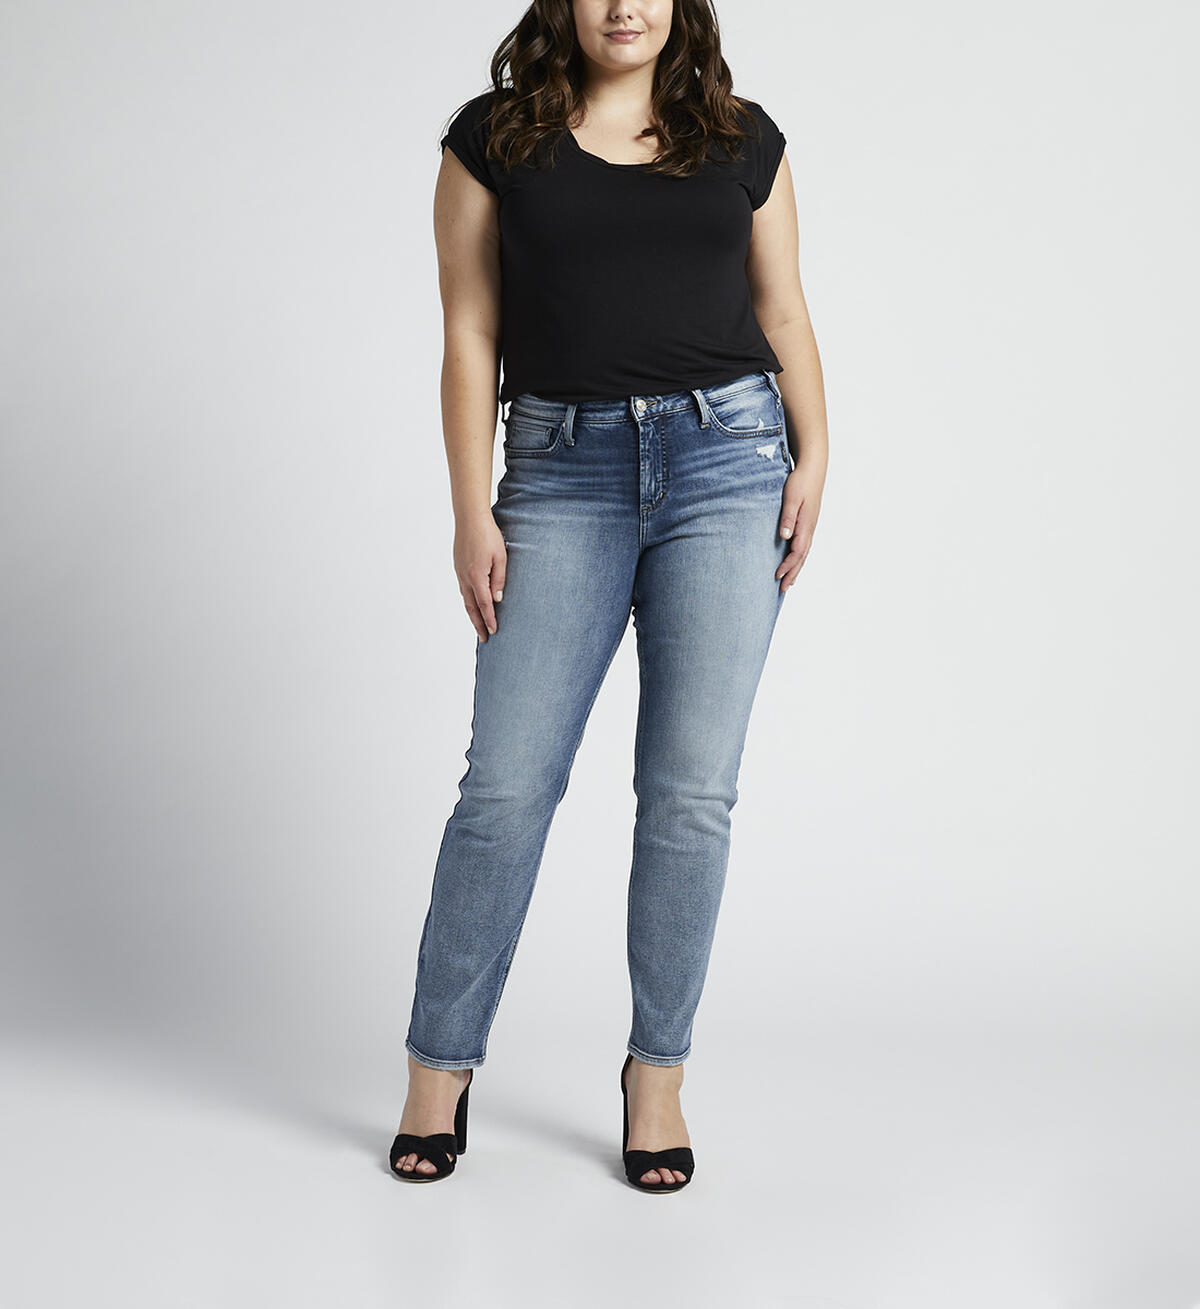 Most Wanted Mid Rise Straight Leg Jeans Plus Size, , hi-res image number 0